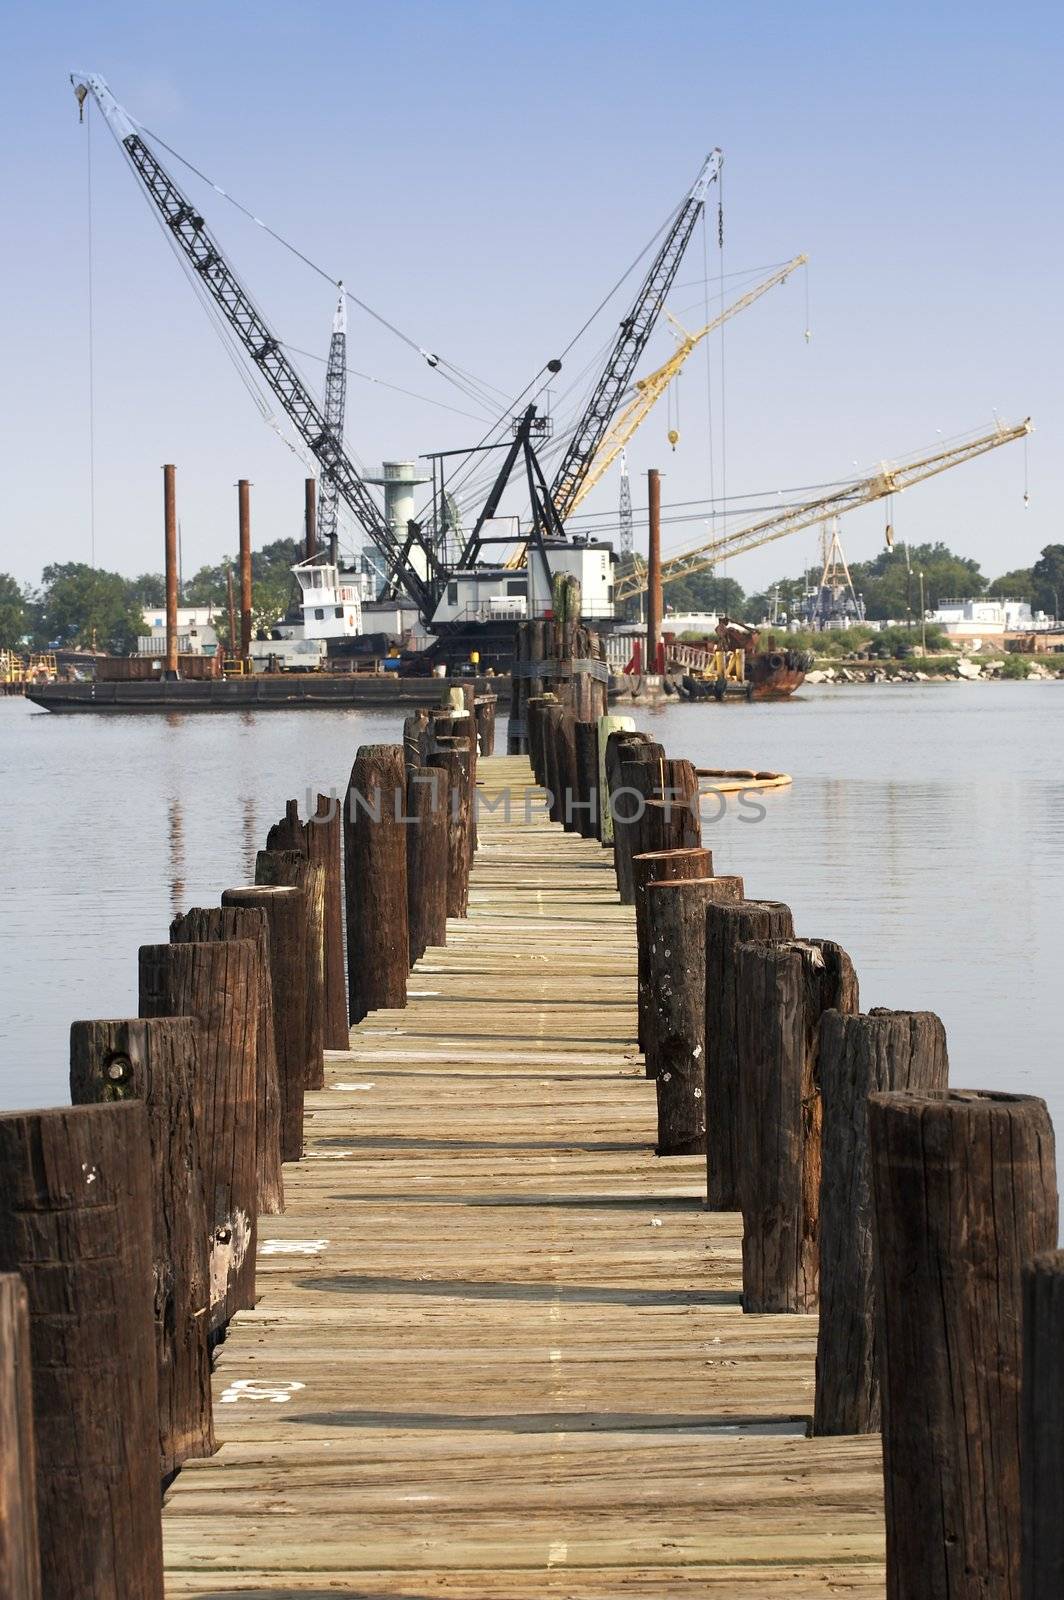 a pier view of floating cranes on the water